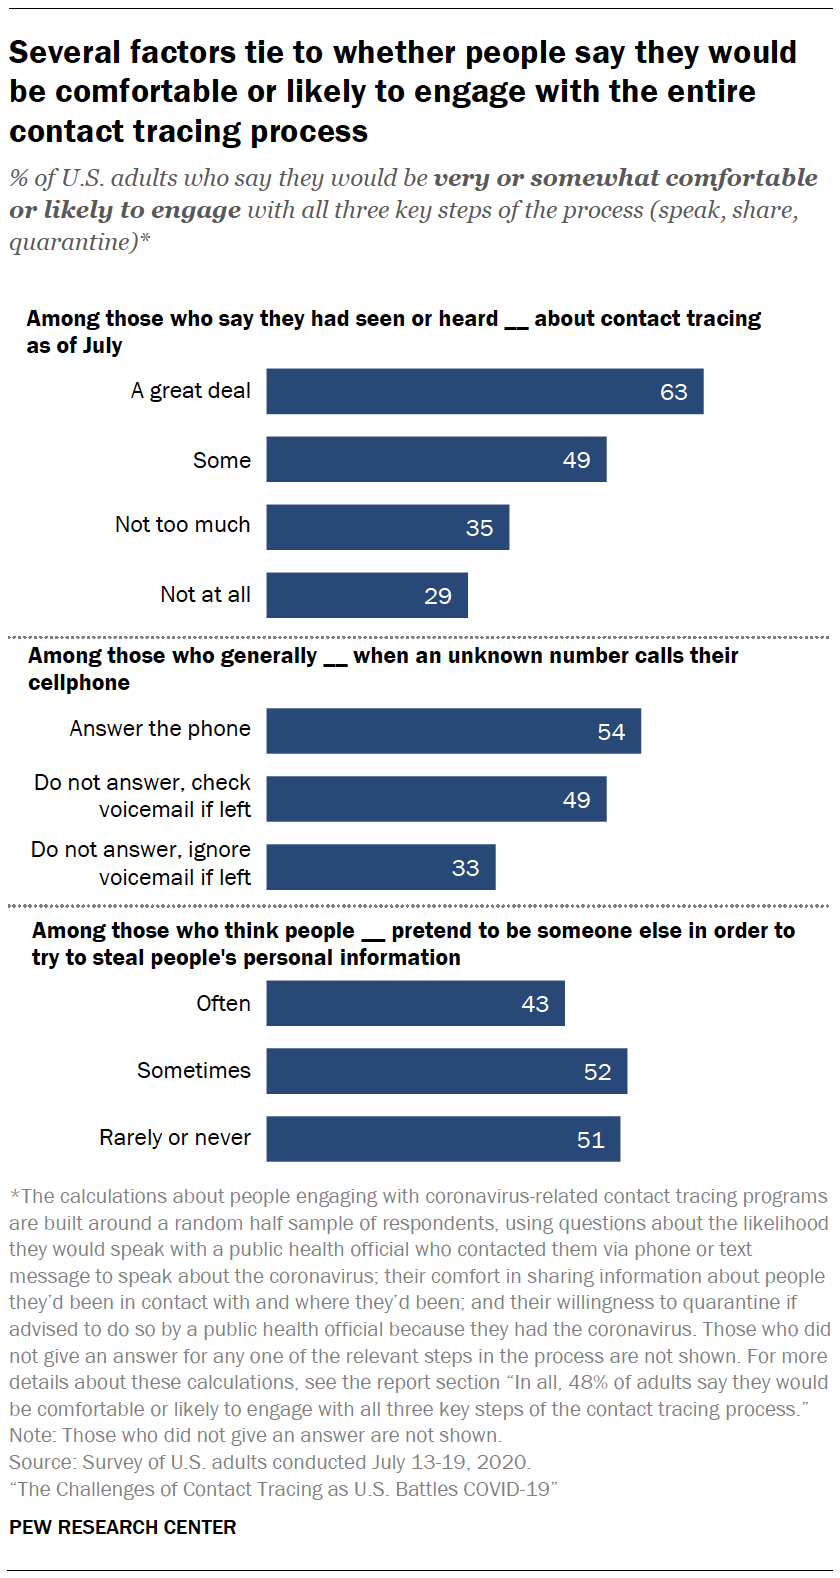 Chart shows several factors tie to whether people say they would be comfortable or likely to engage with the entire contact tracing process